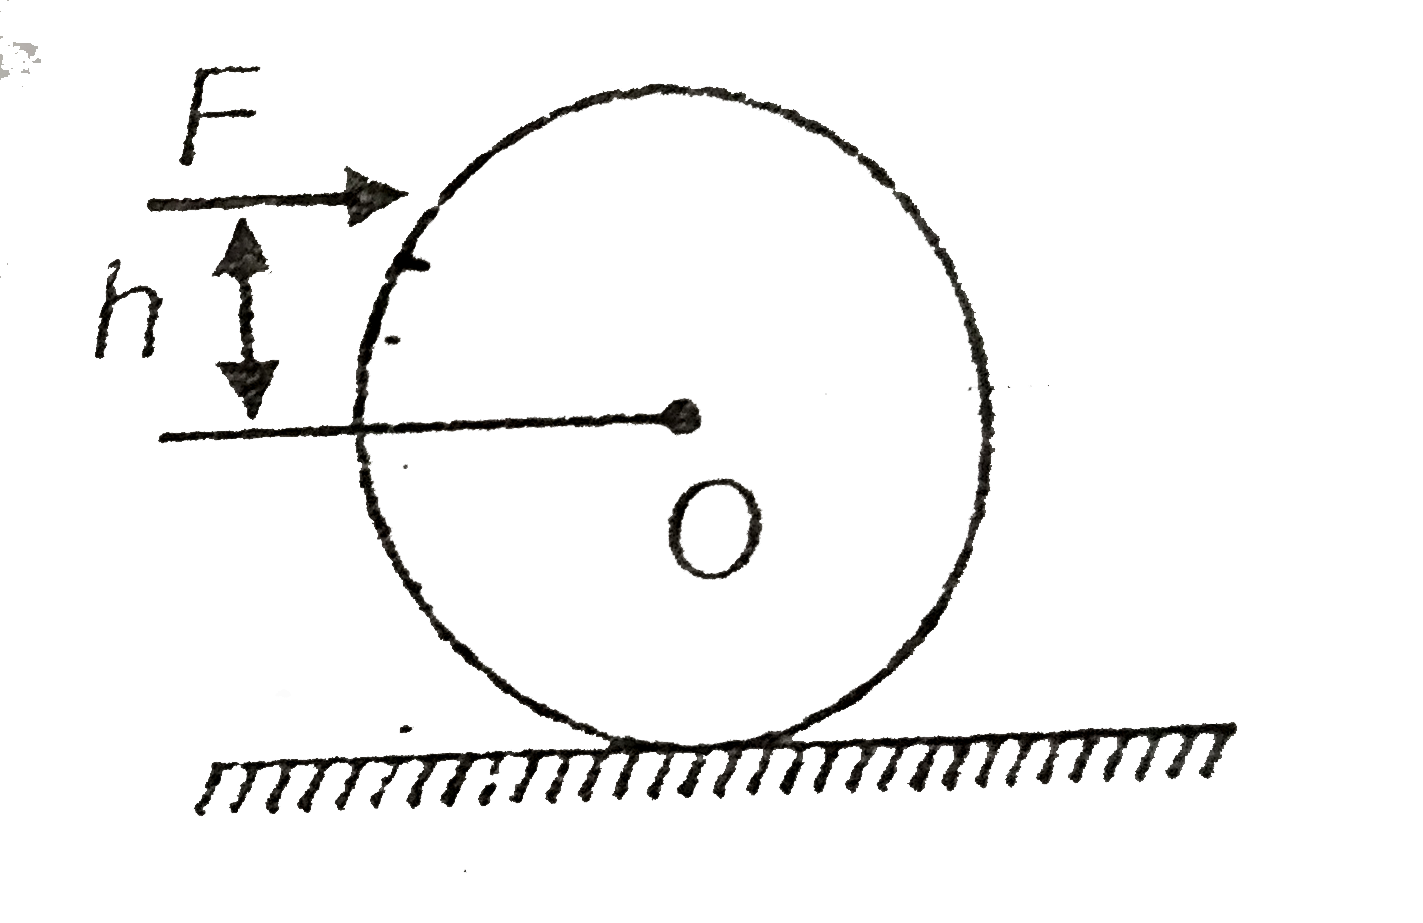 A uniform round body of radius R and  mass m and its moment of inertia about centre of mass O is I(cm) is given. A force F is applied at a height h above the centre of the round body. Find the height h at which force should be applied so that it rolls without friction.